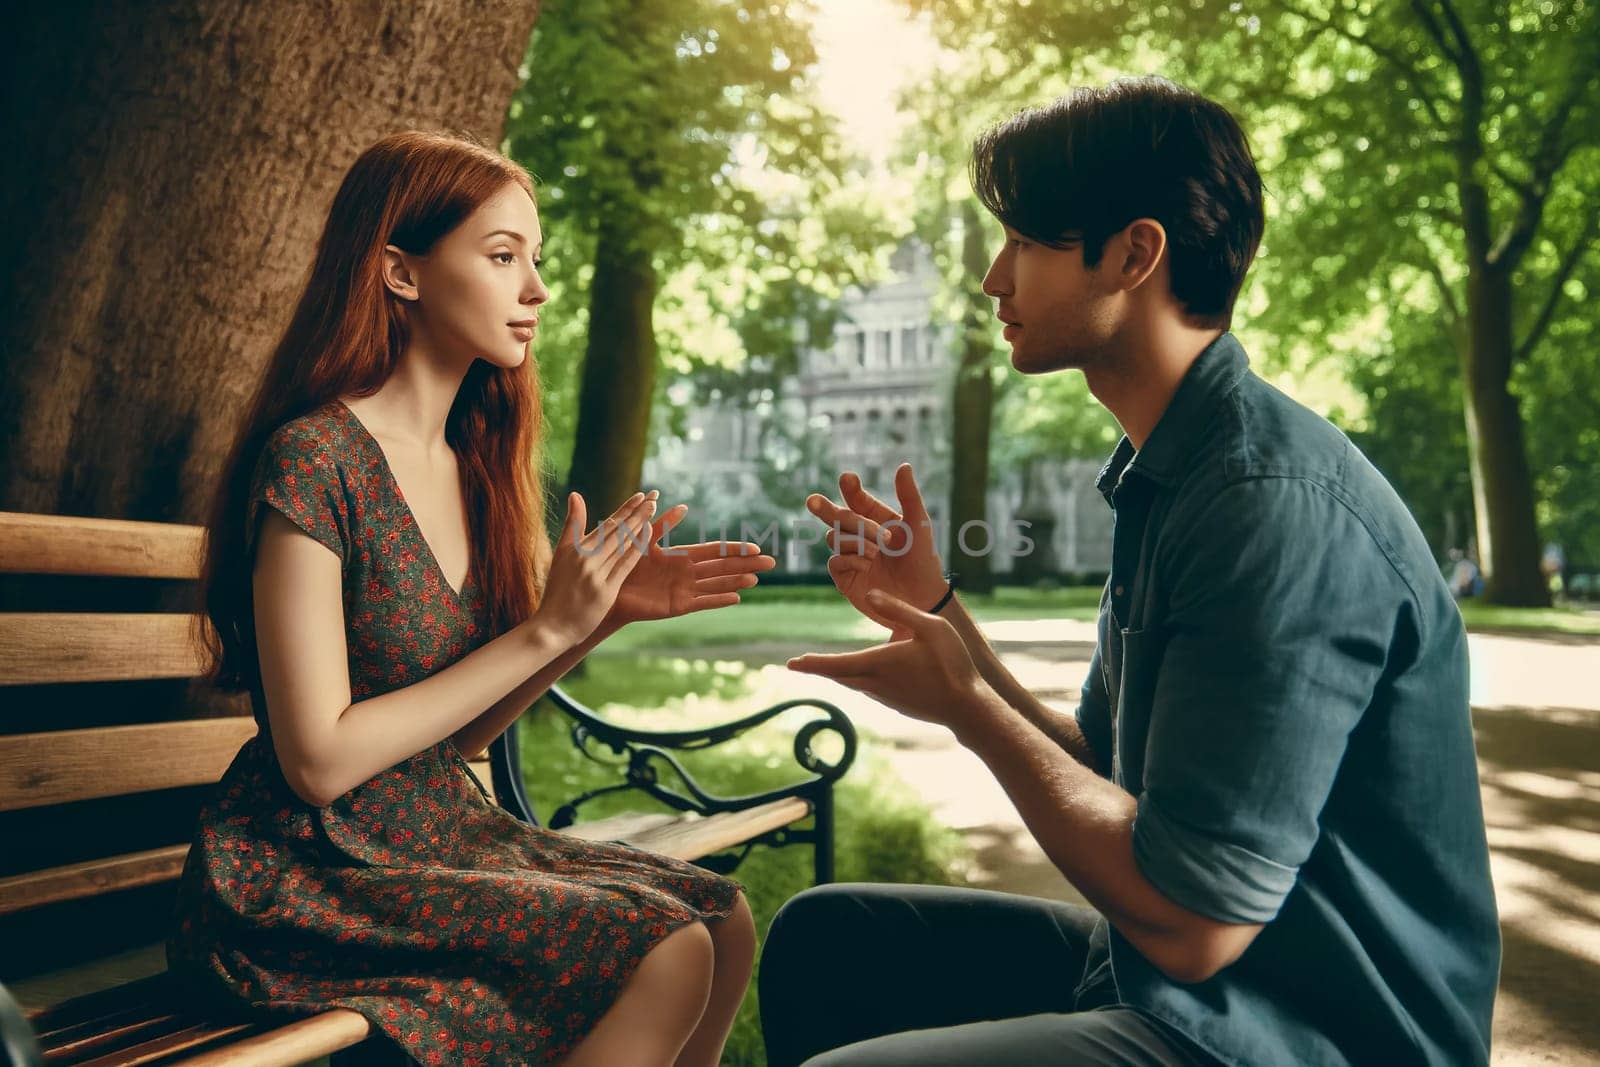 Deaf and mute guy and girl communicate using sign language in the park.